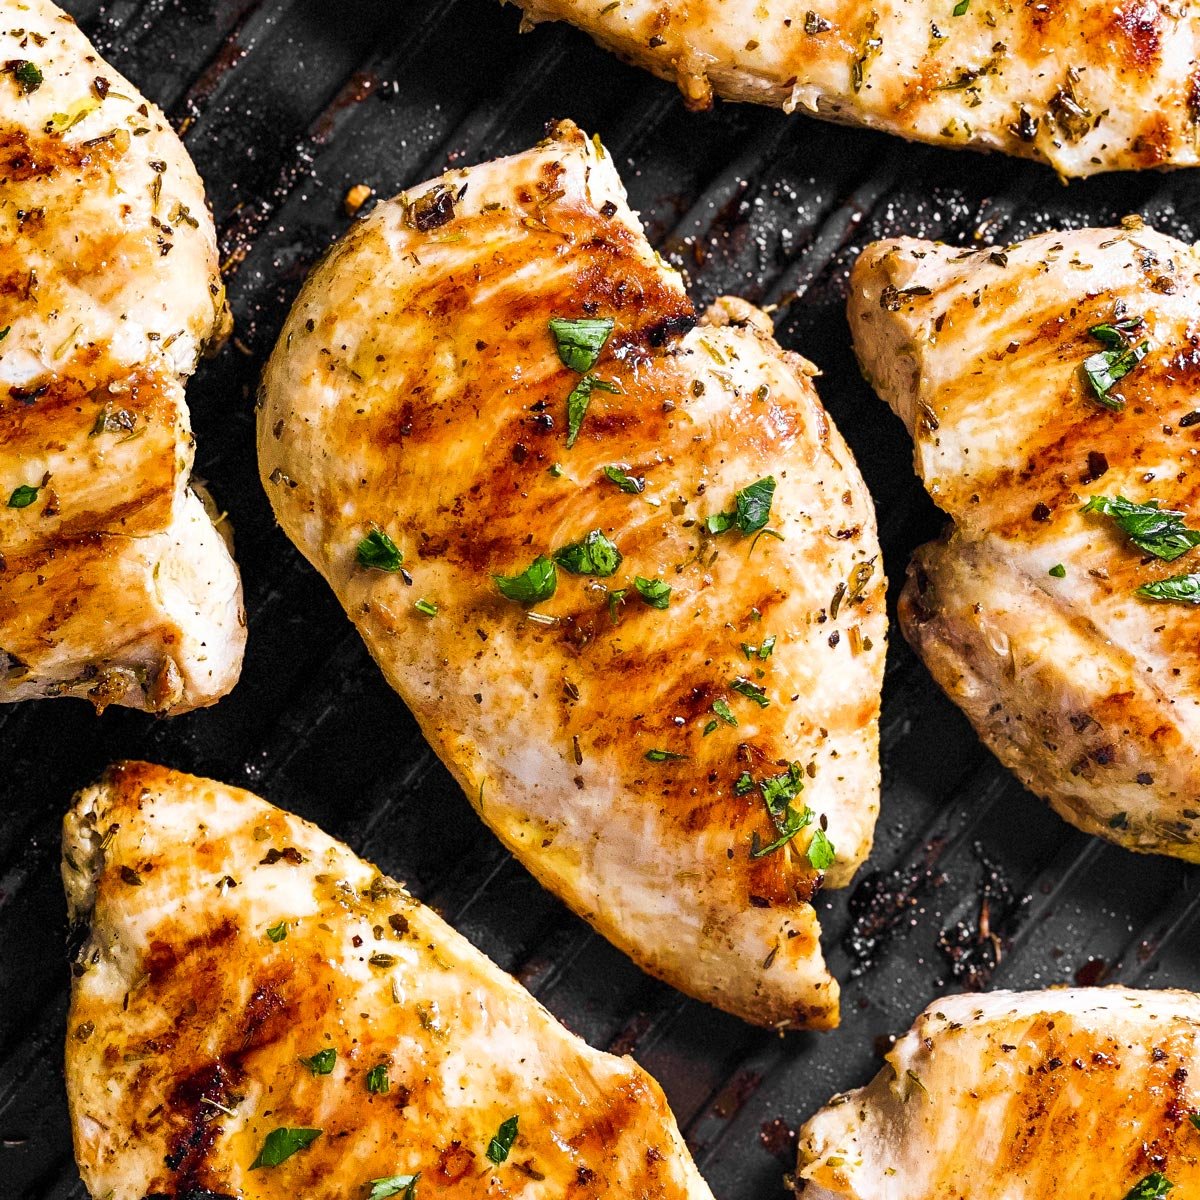 https://www.savorynothings.com/wp-content/uploads/2022/01/grilled-chicken-breast-recipe-image-sq.jpg